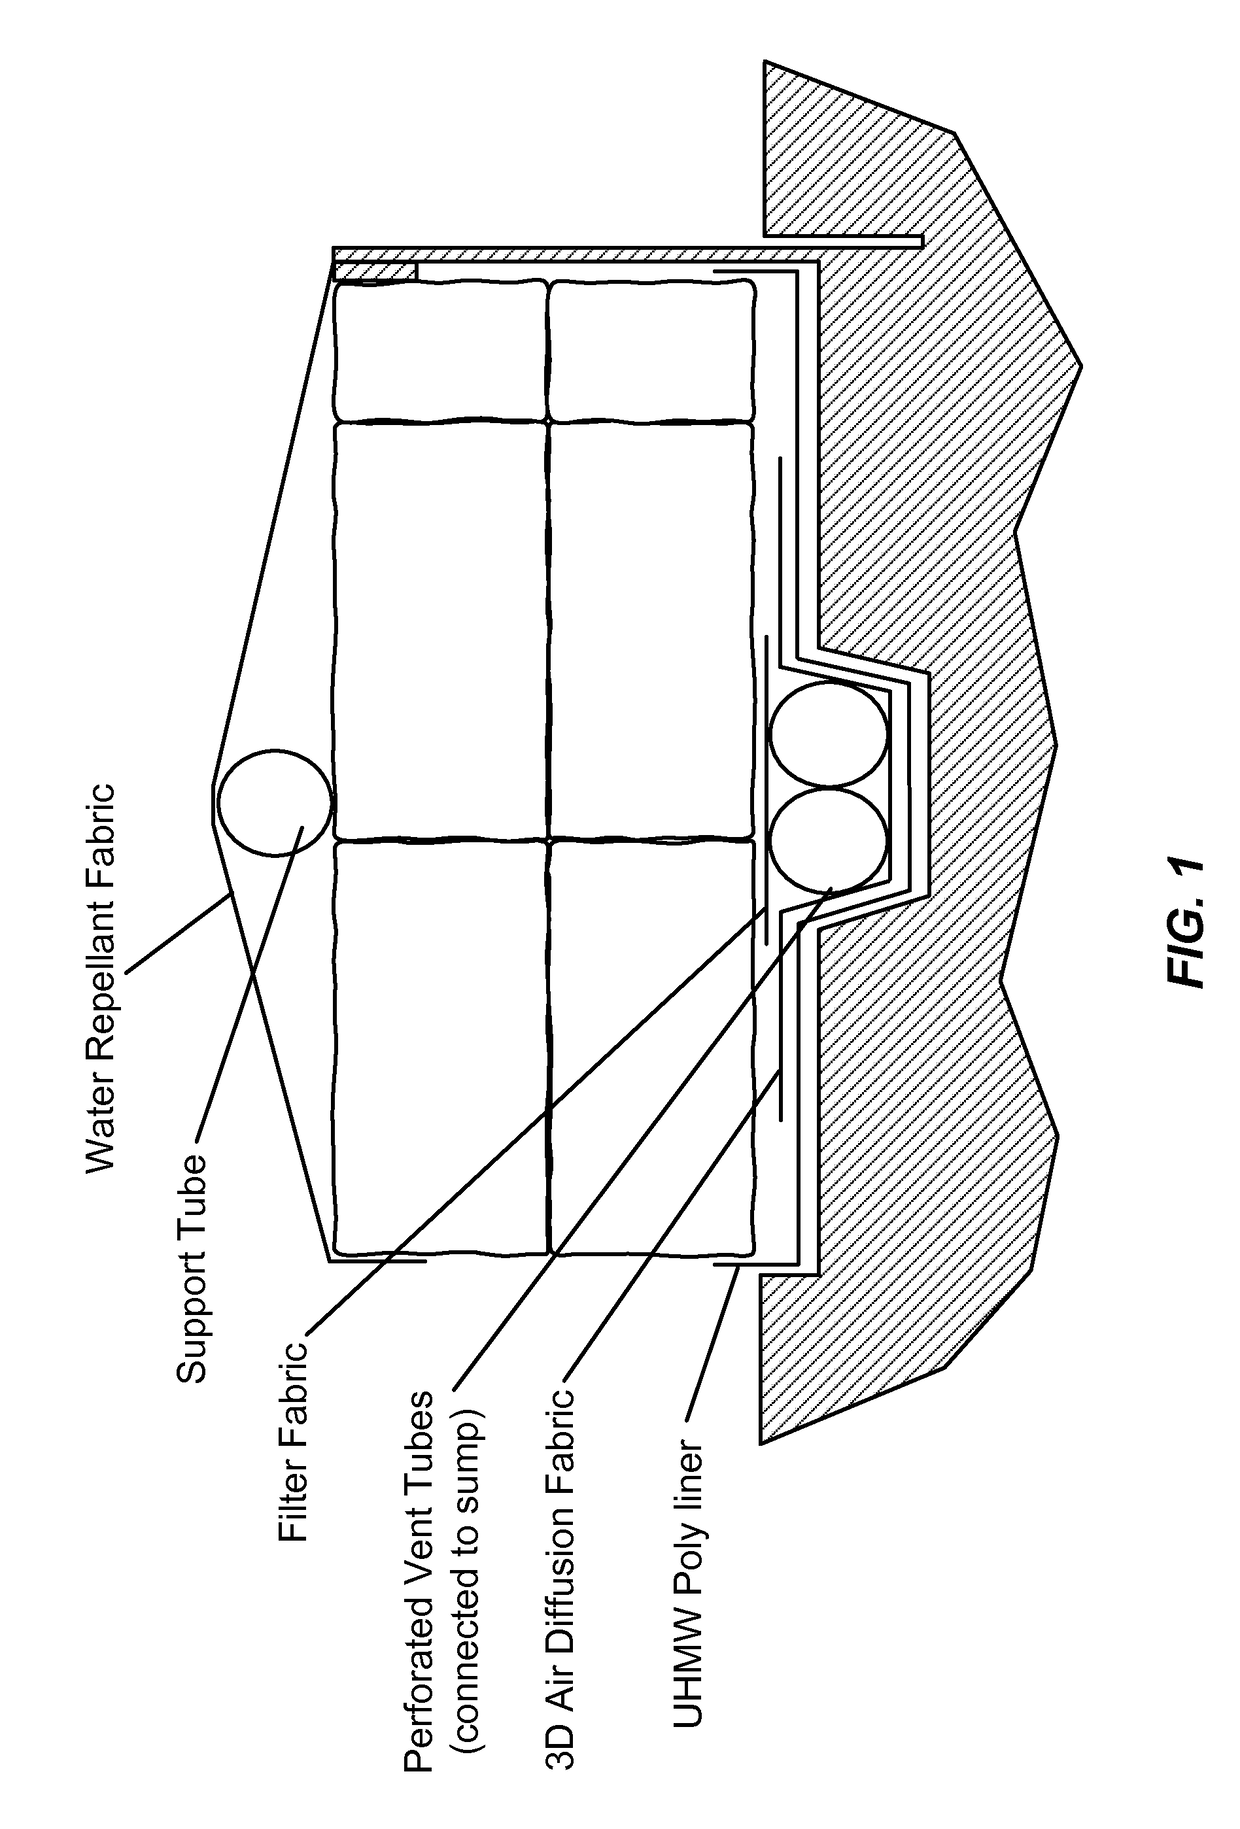 Composting system and method